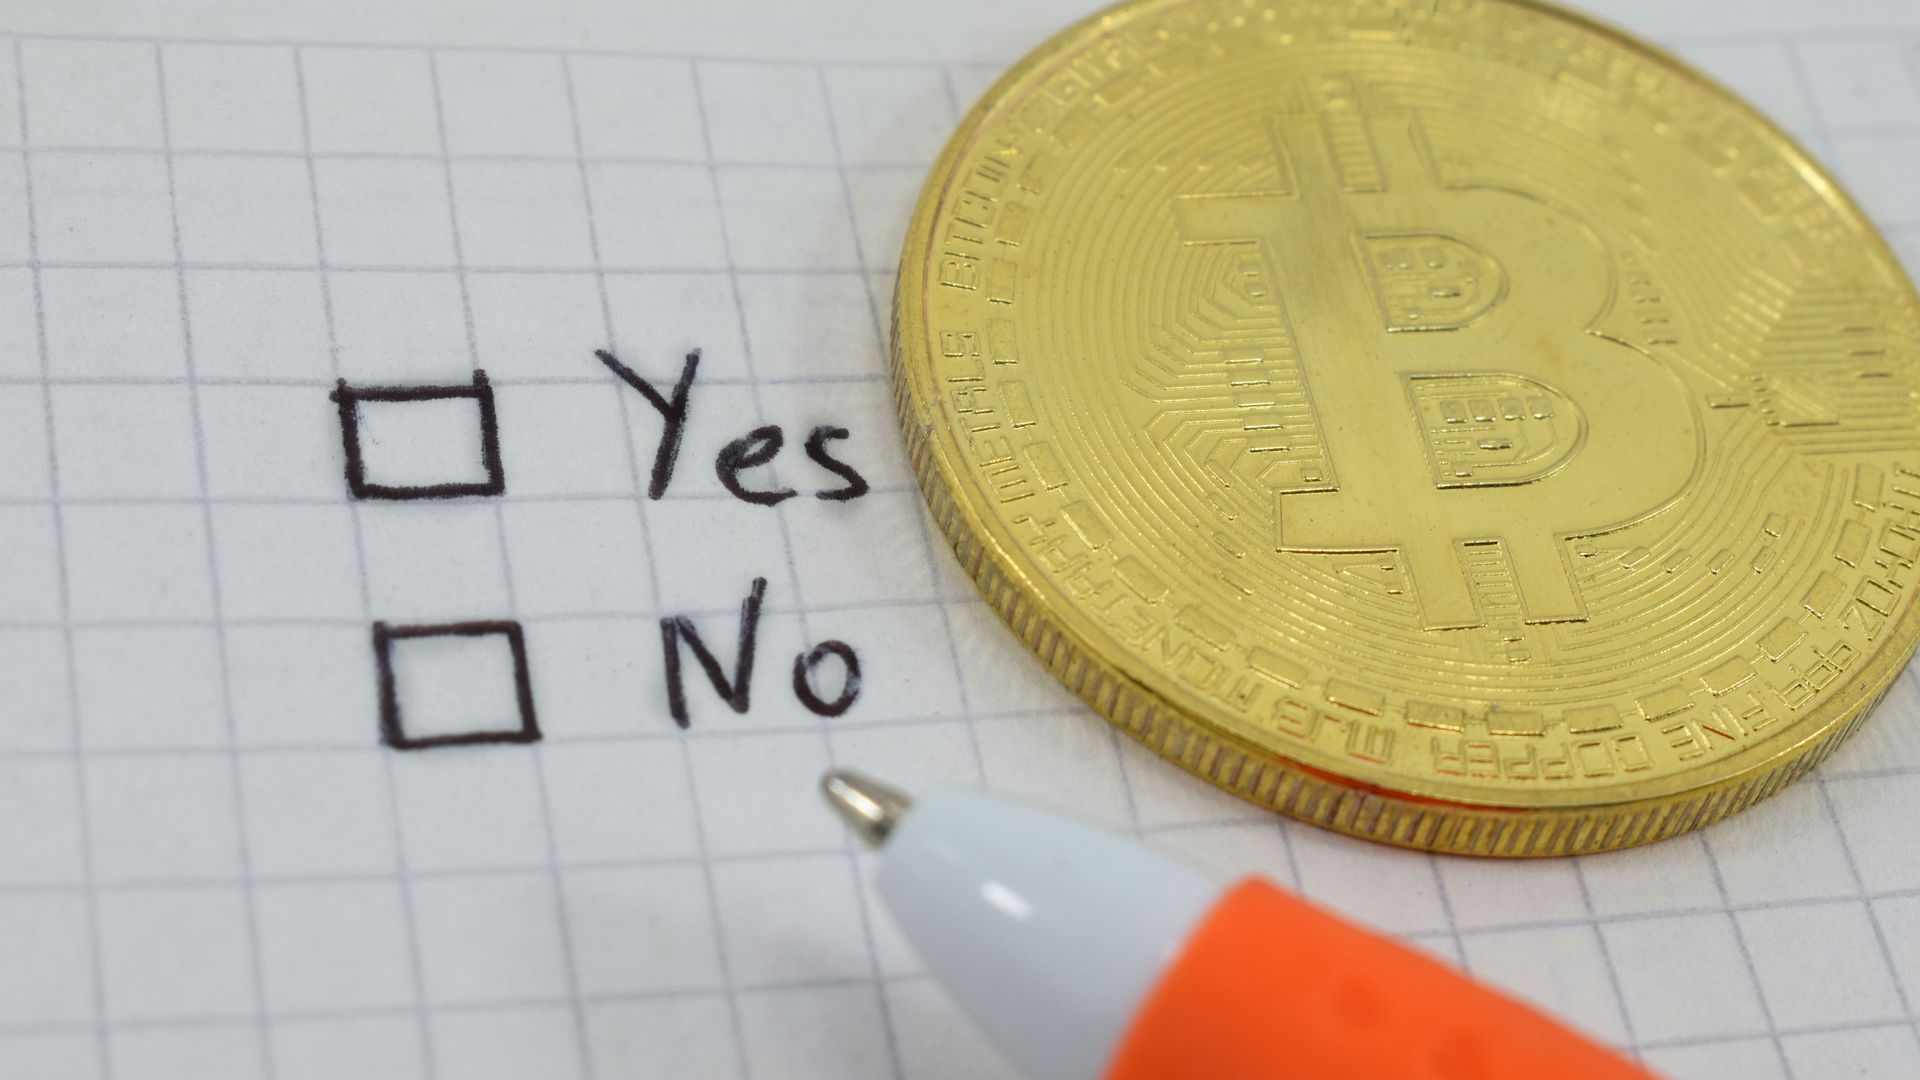 JPMorgan survey finds 78% of institutional traders have no plans to trade crypto teaser image